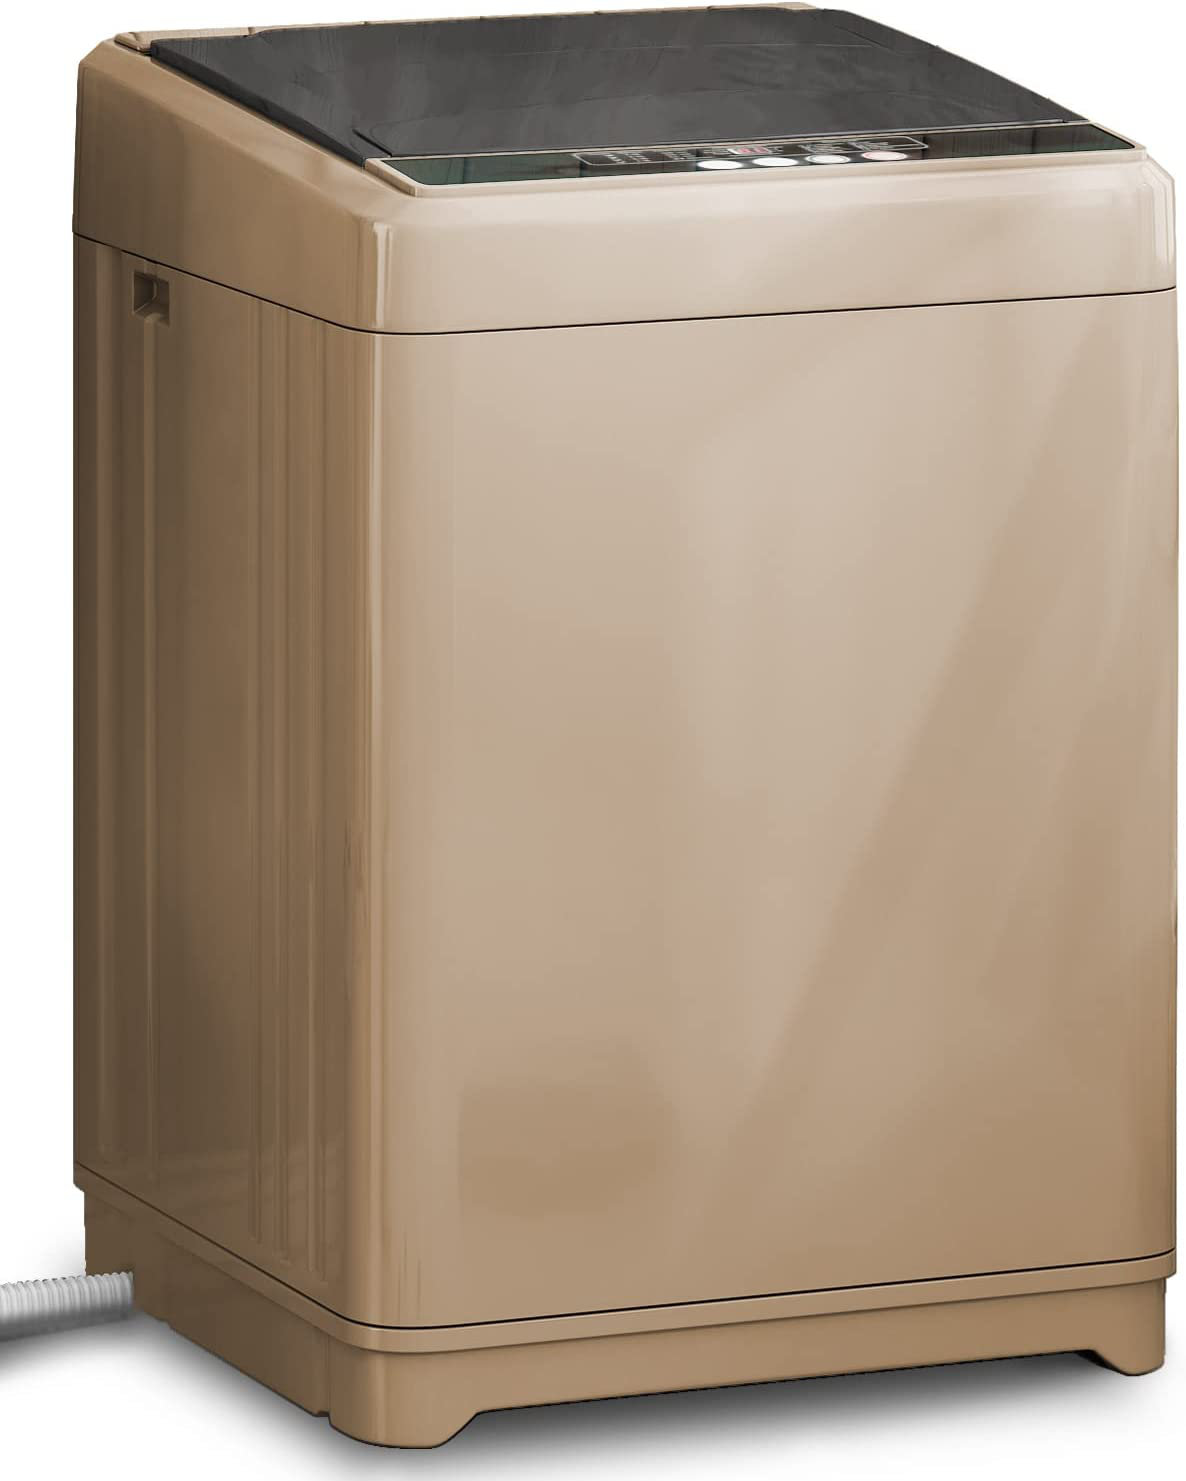 Costway Full-Automatic Washing Machine 1.5 Cu.Ft 11 LBS Washer & Dryer  White 